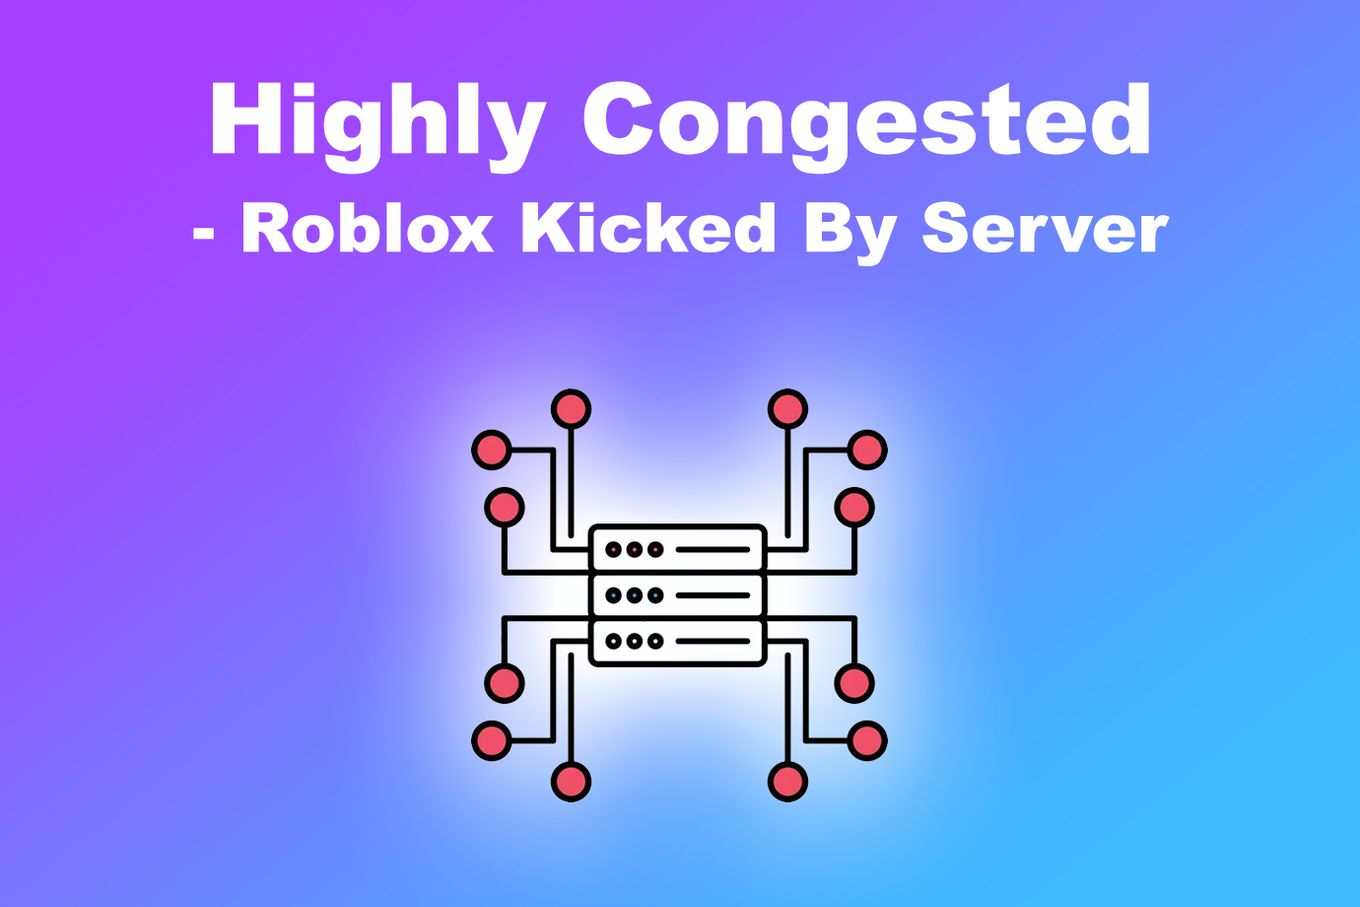 Highly Congested - Roblox Kicked by Server